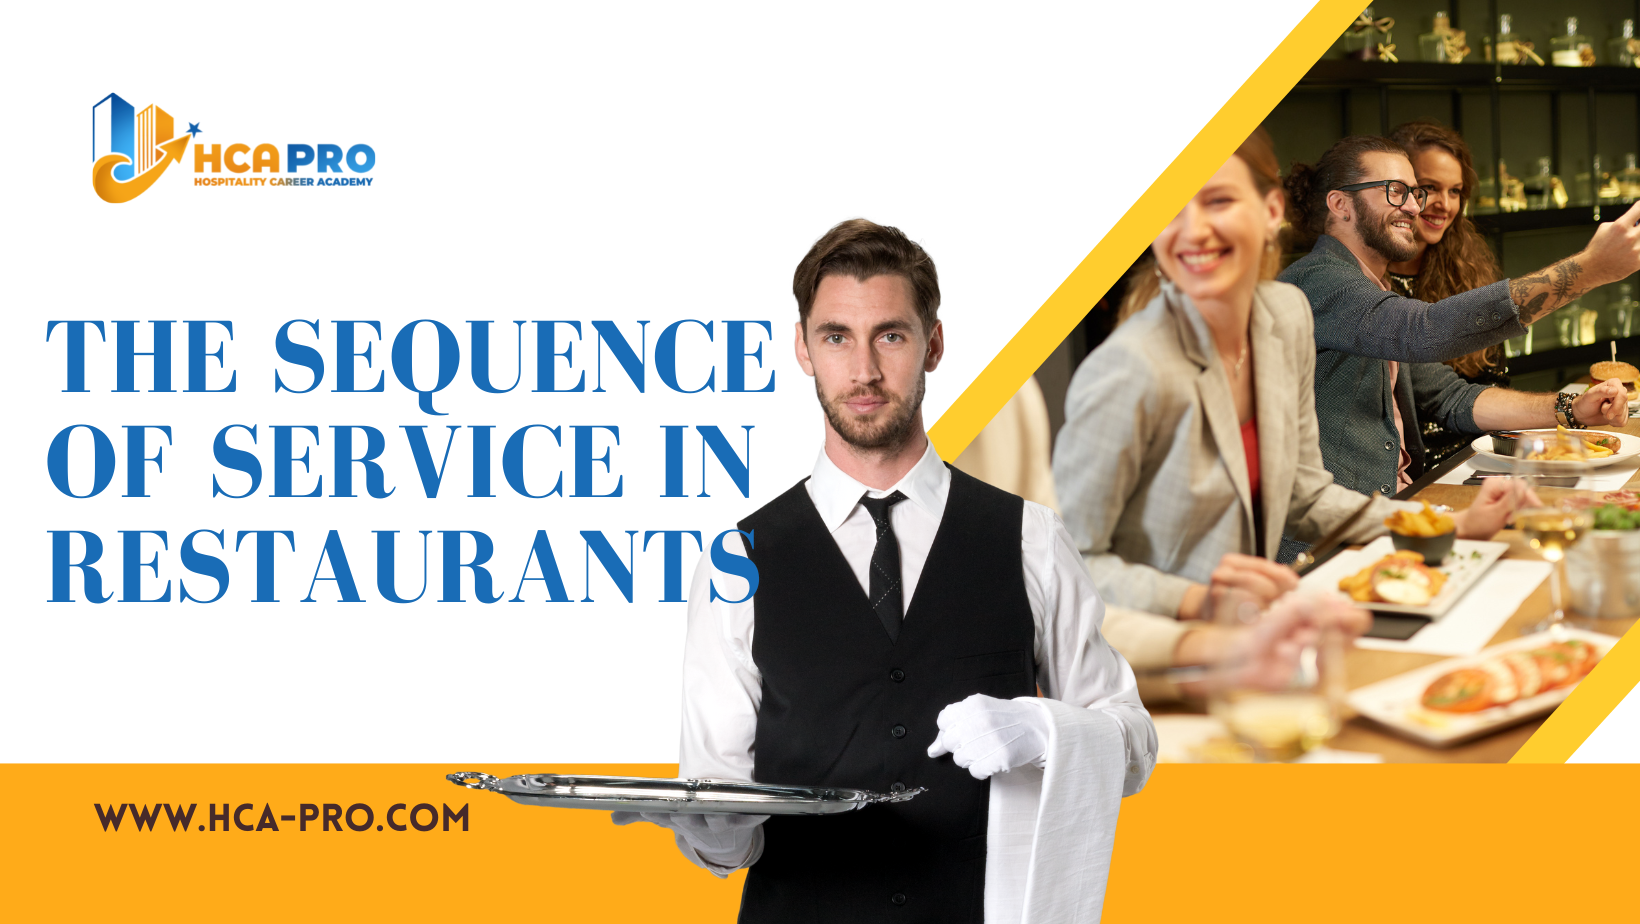 The Sequence of Service in Restaurants